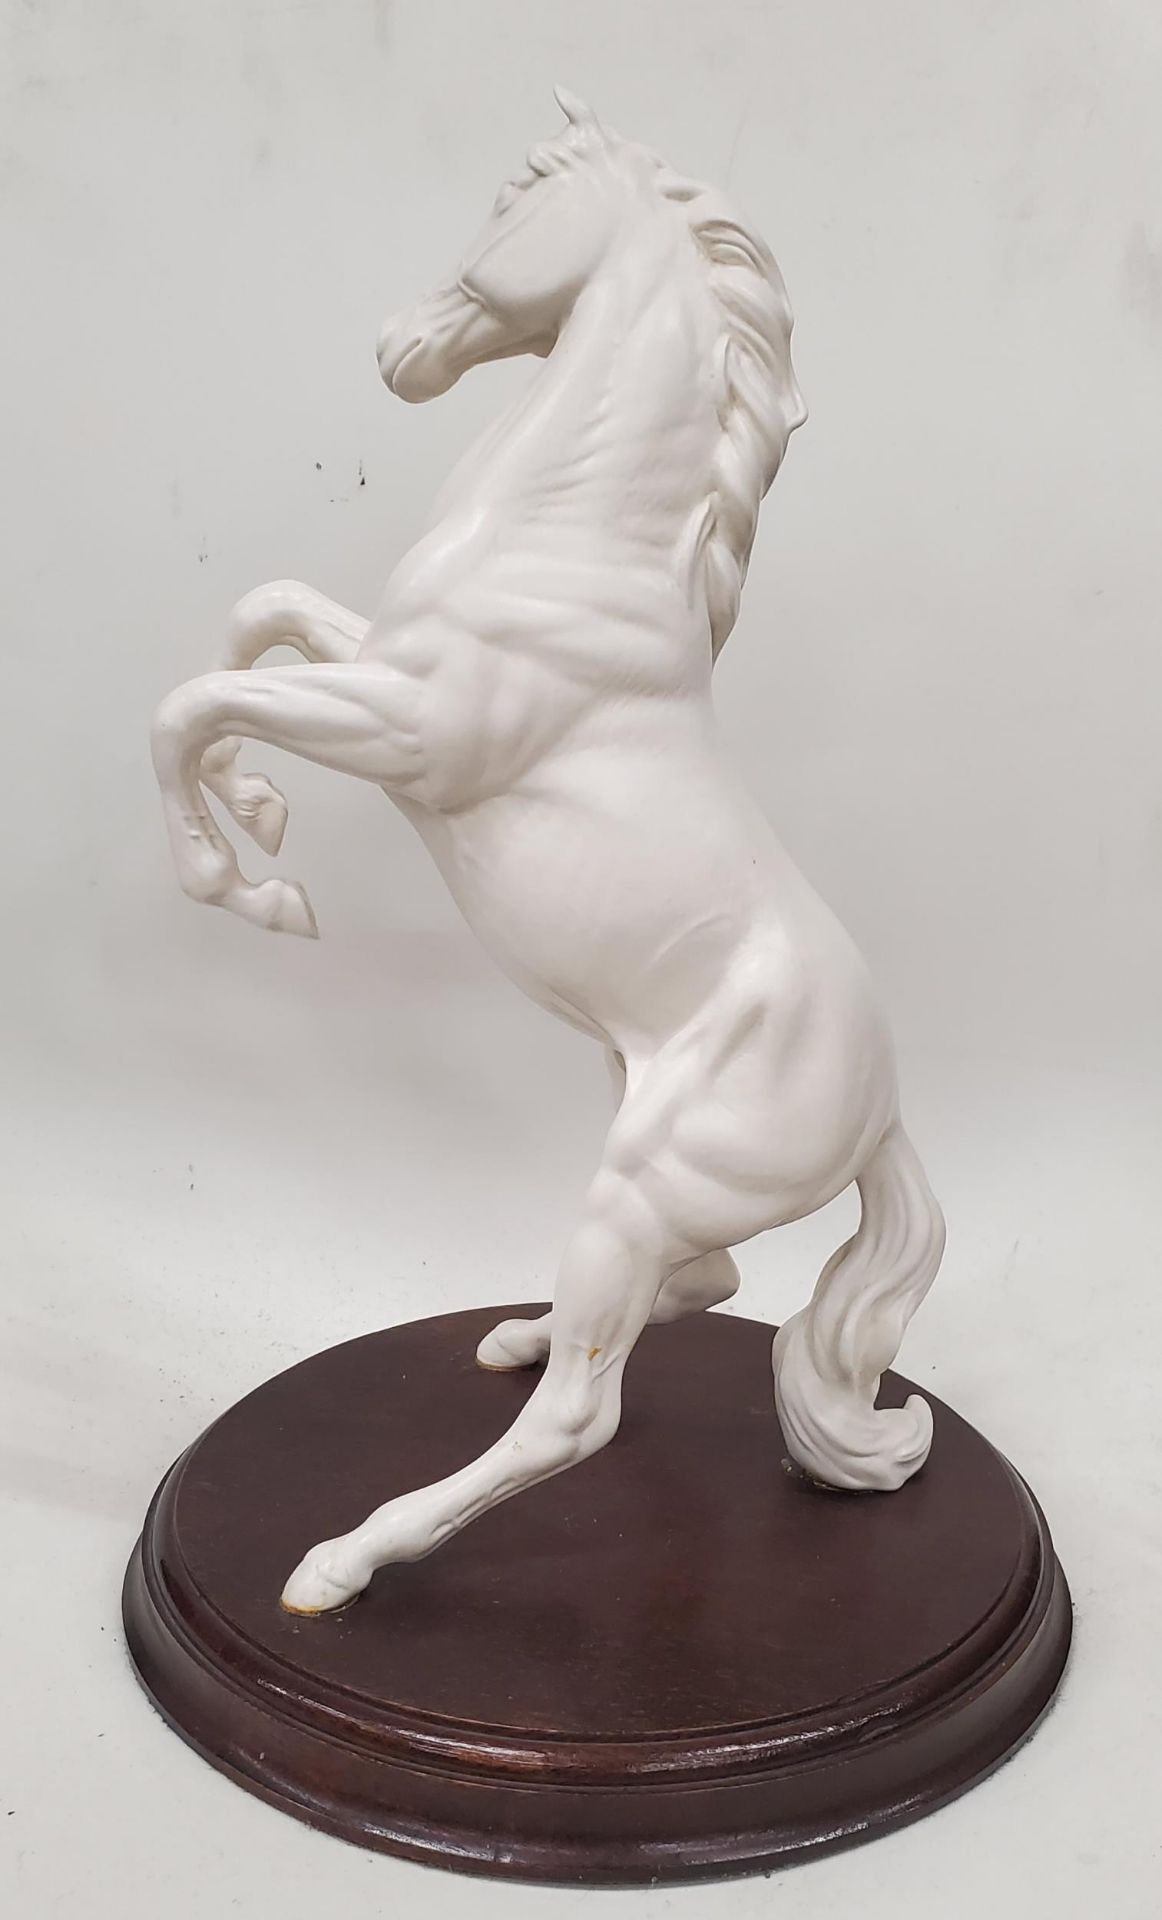 A BESWICK/DOULTON REARING WHITE HORSE ON A WOODEN PLINTH, HEIGHT 30CM - Image 2 of 2